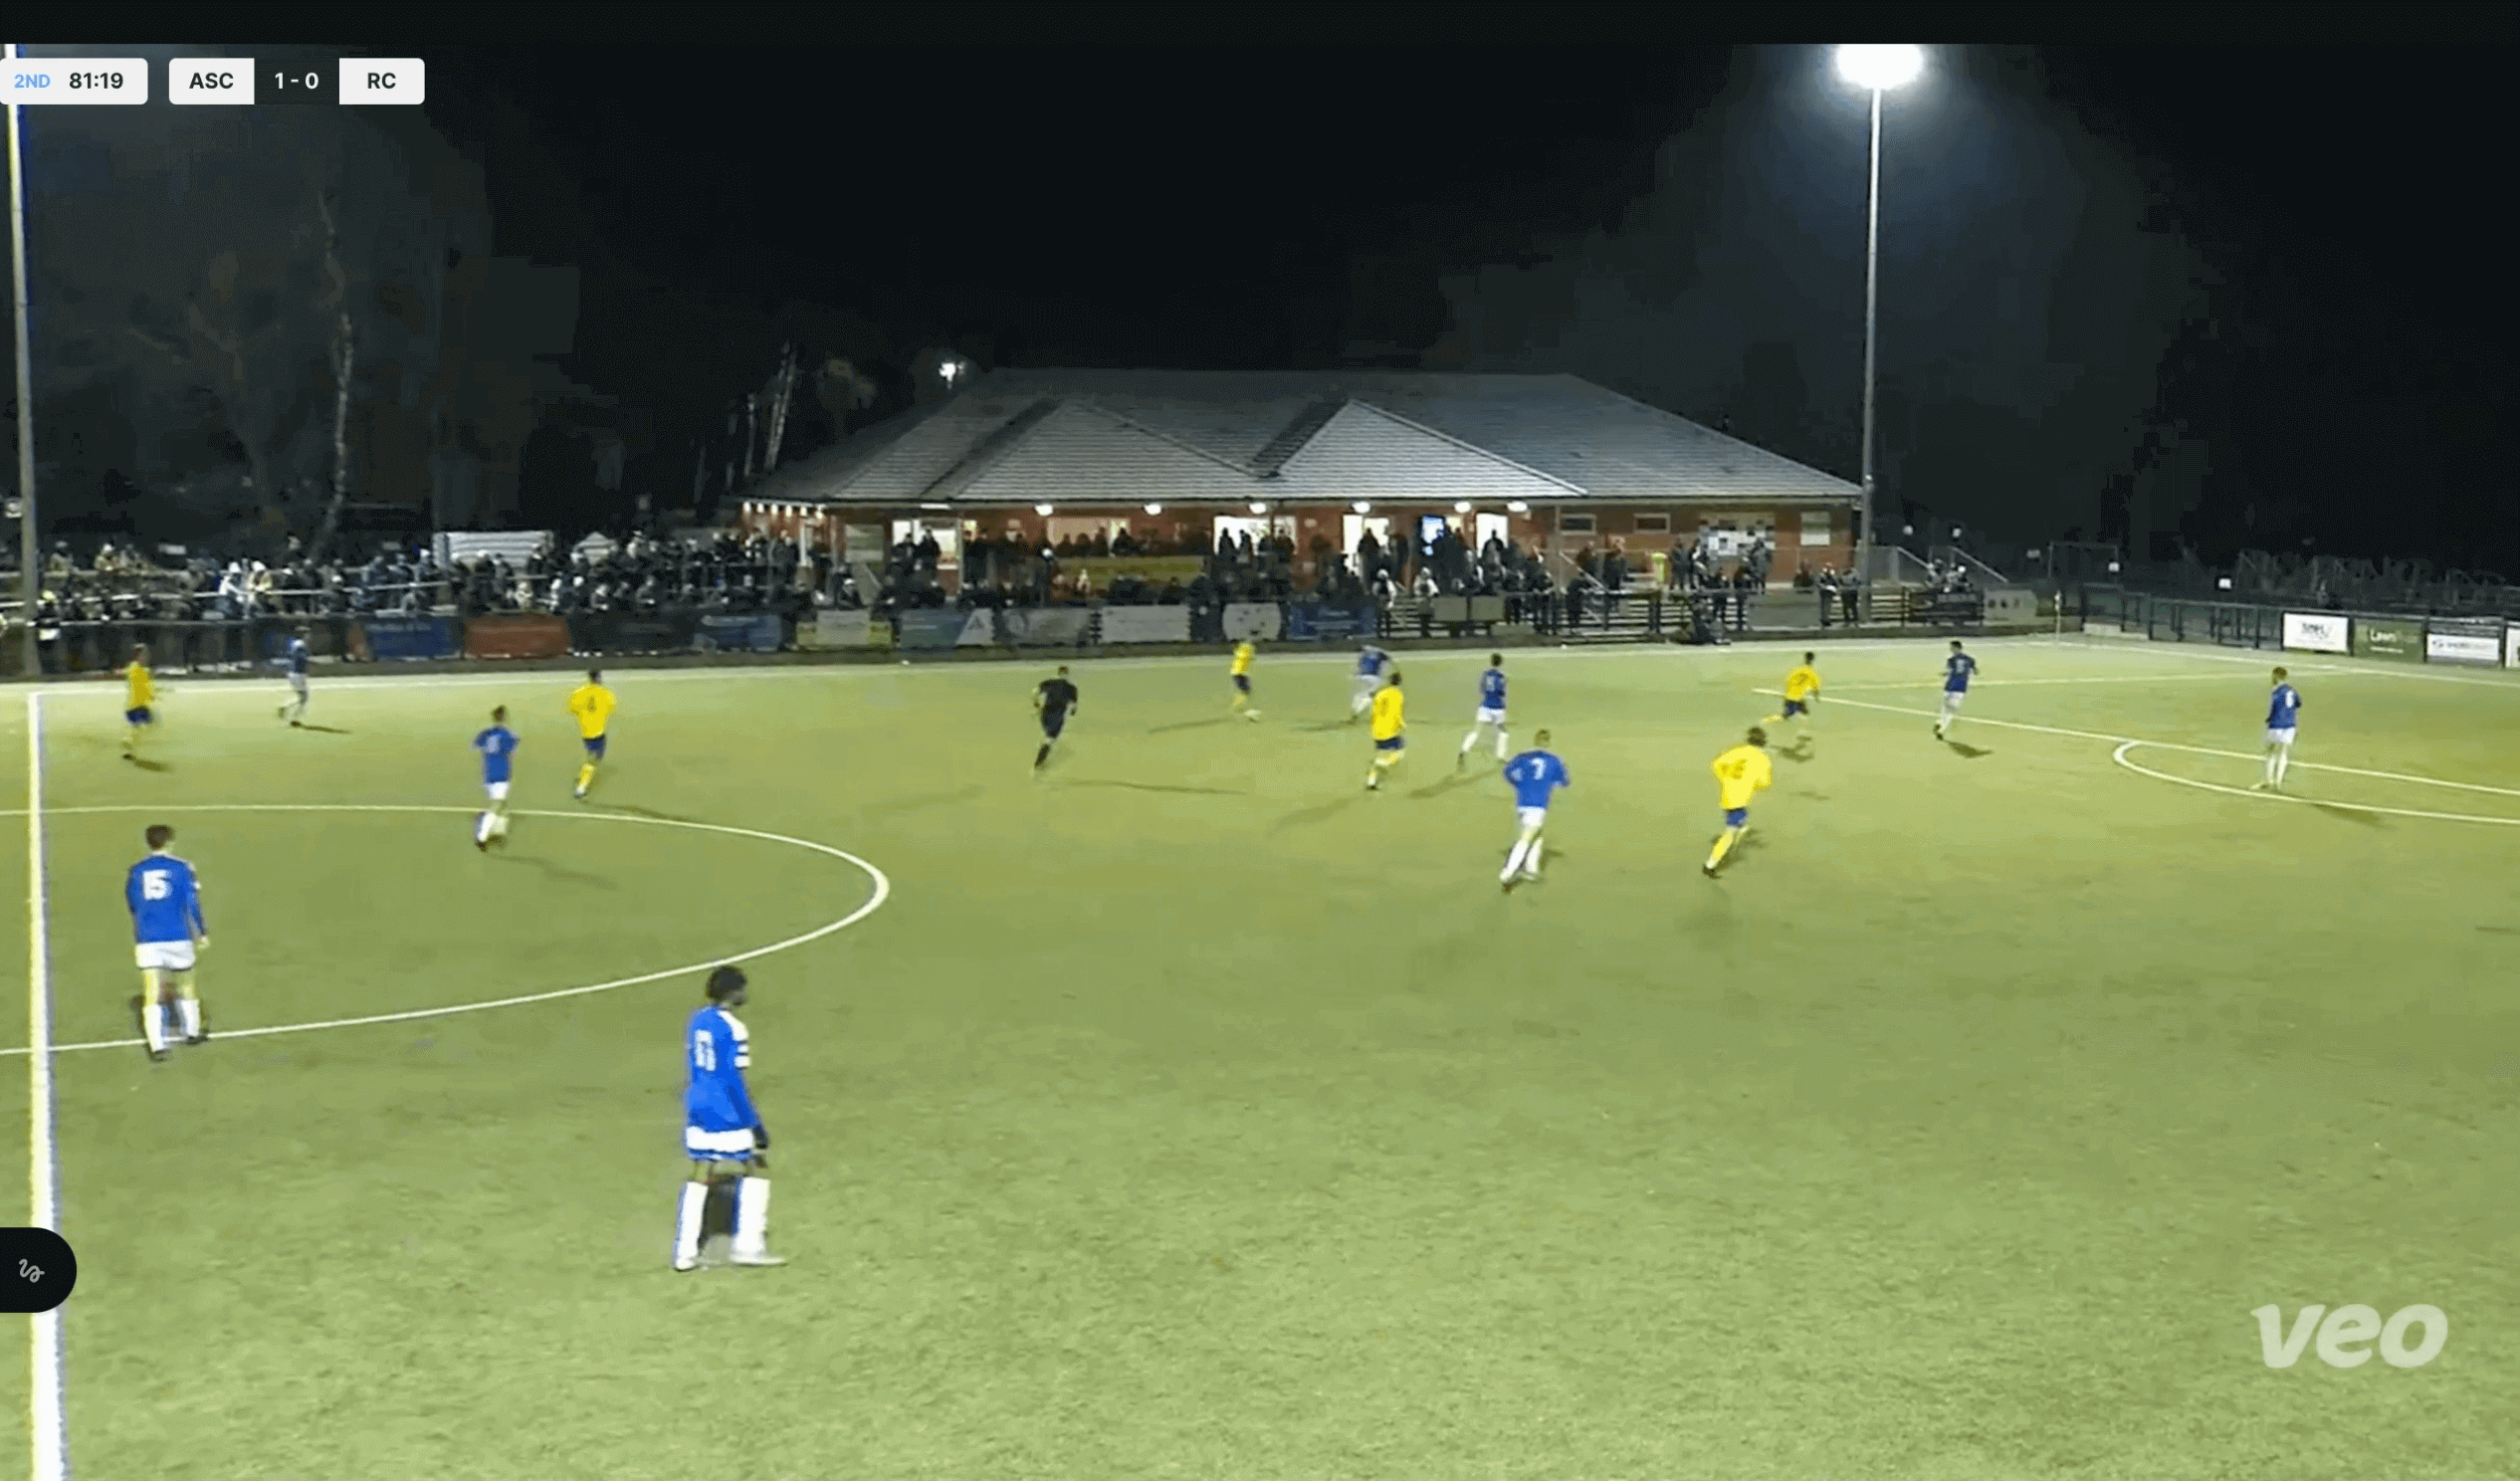 Recording from a football match captured by a Veo camera.